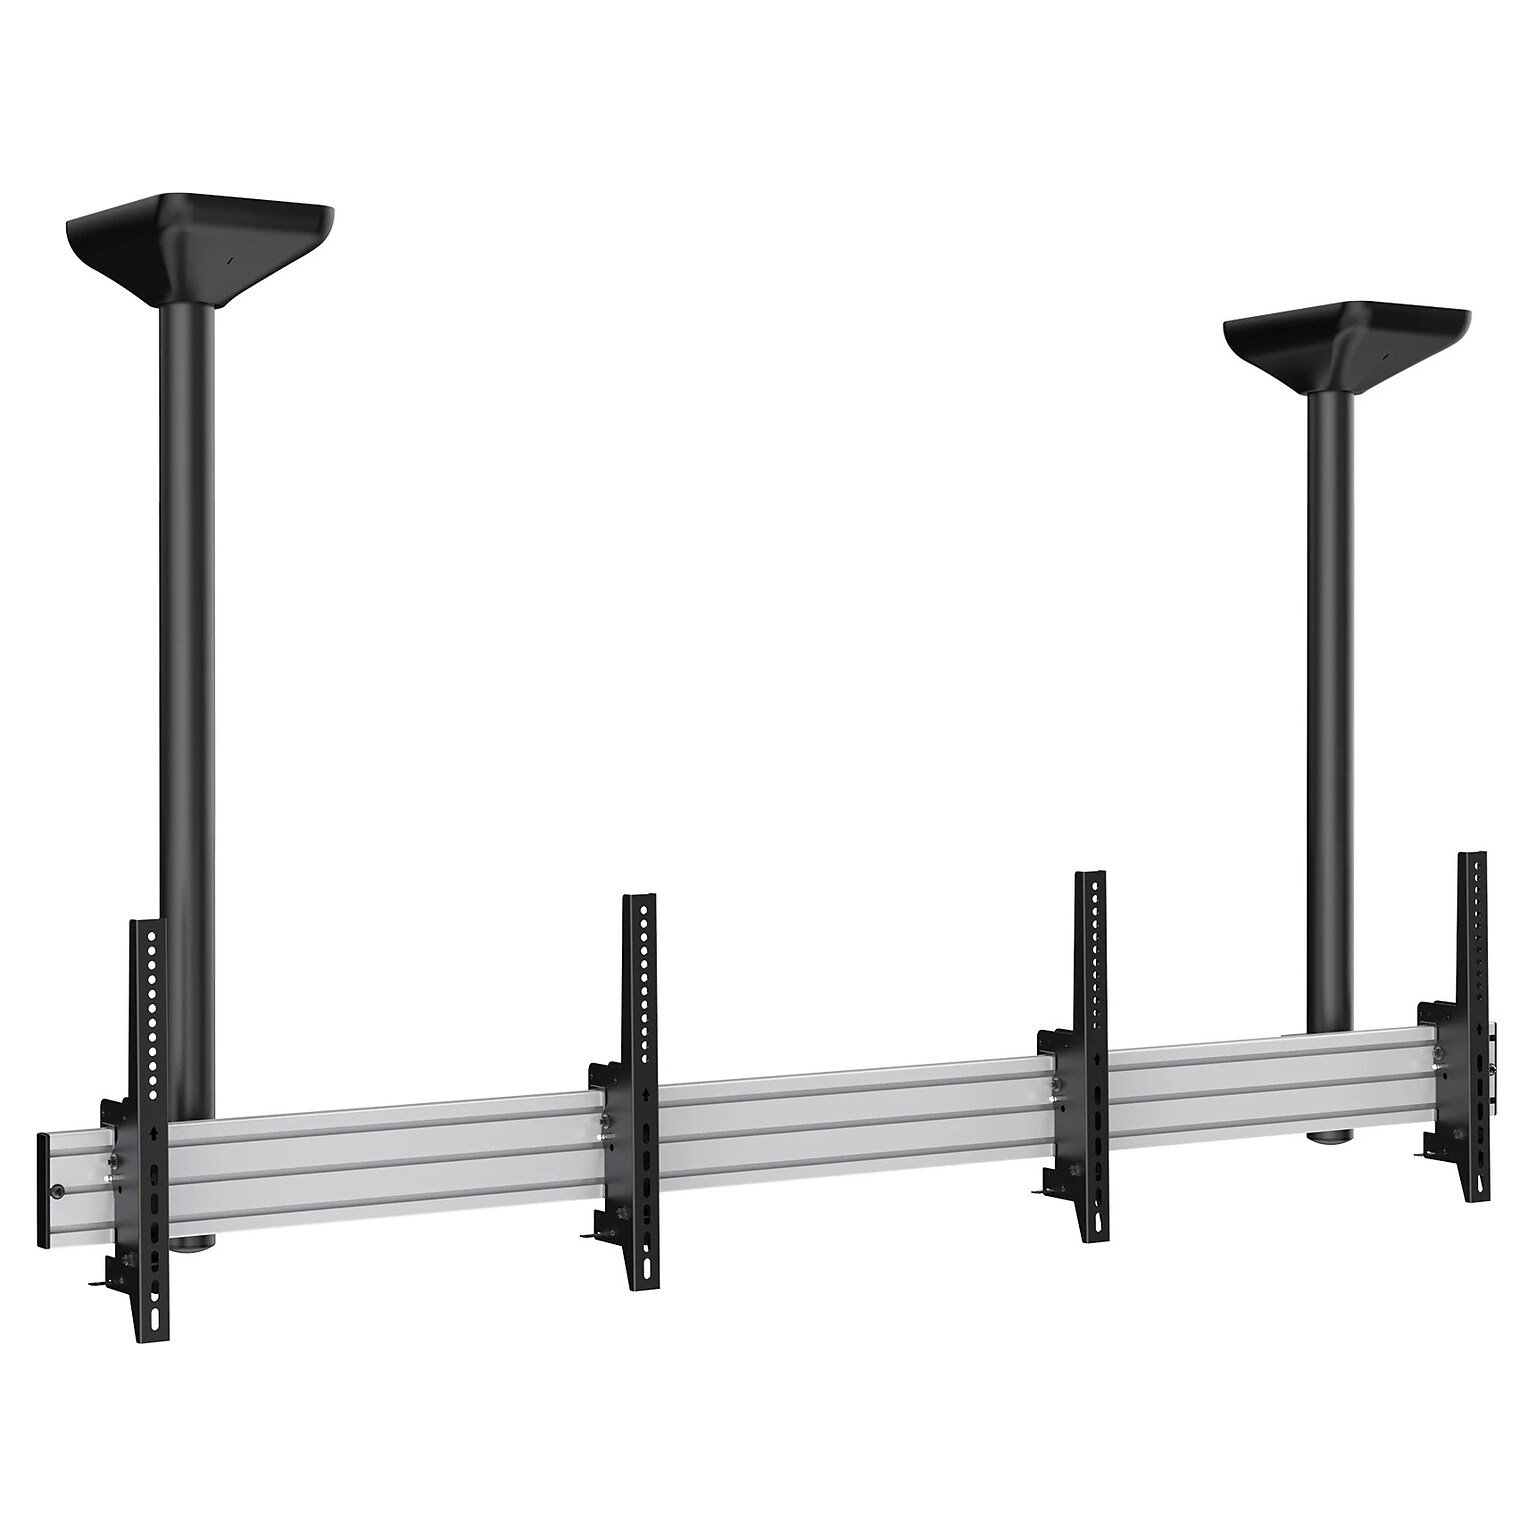 Mount-It! Tilt Ceiling Dual TV Mount for 2 LCD Displays: Screen Size: 45 to 55, 110 lbs. Max. (MI-512B)